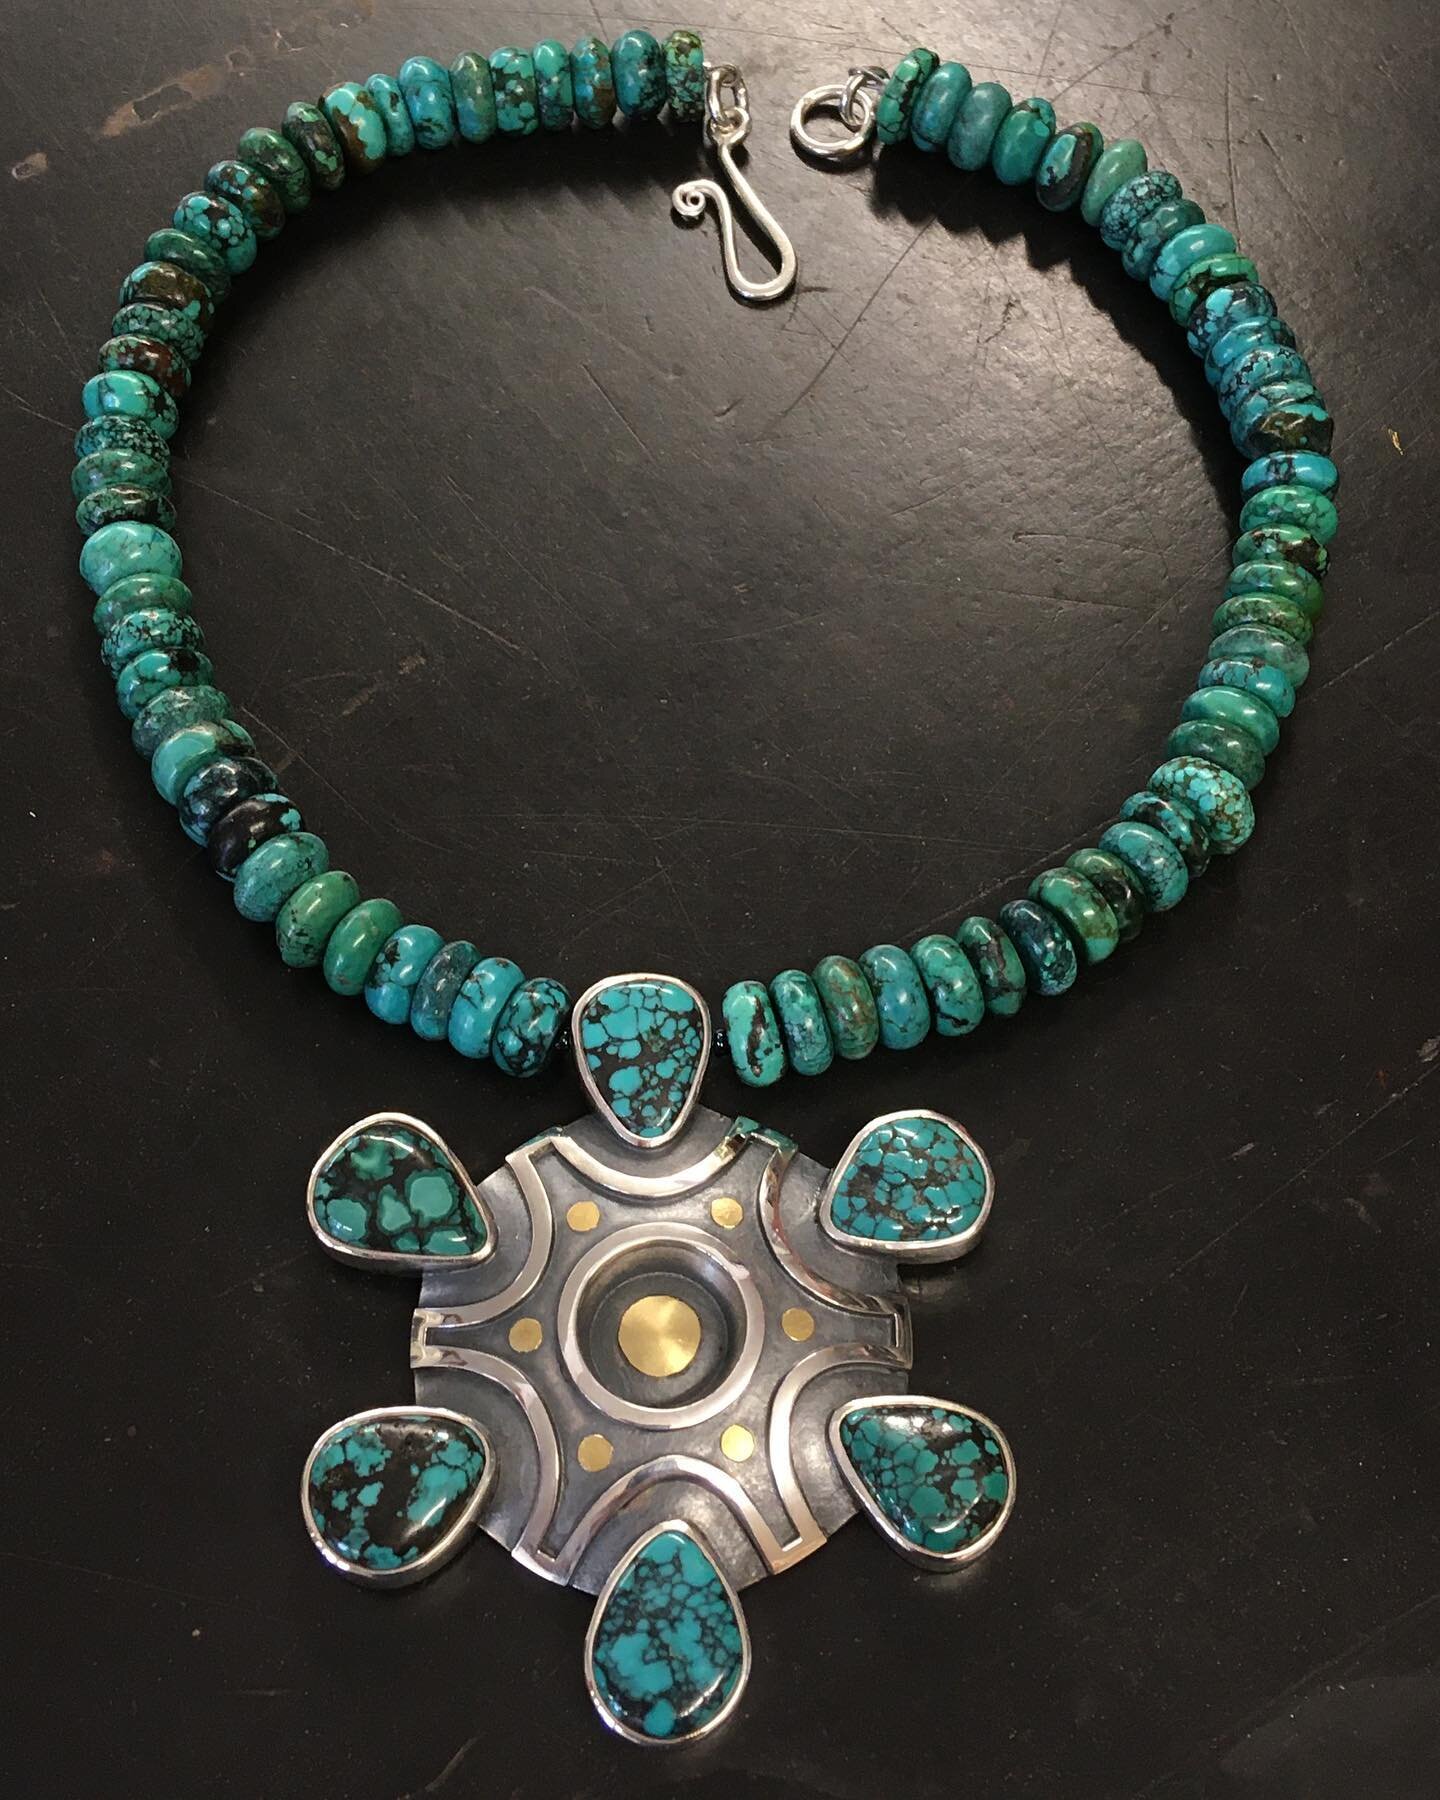 This years labour of love. A joy to give and a joy to make.
Silver 18ct and turquoise necklace. Turquoise from @mmccallumfga #valentines #turquoisejewellery #silverand18ct #handmadejewellery #onmybench #jewellerydesign #sentimental #turquoisenecklace